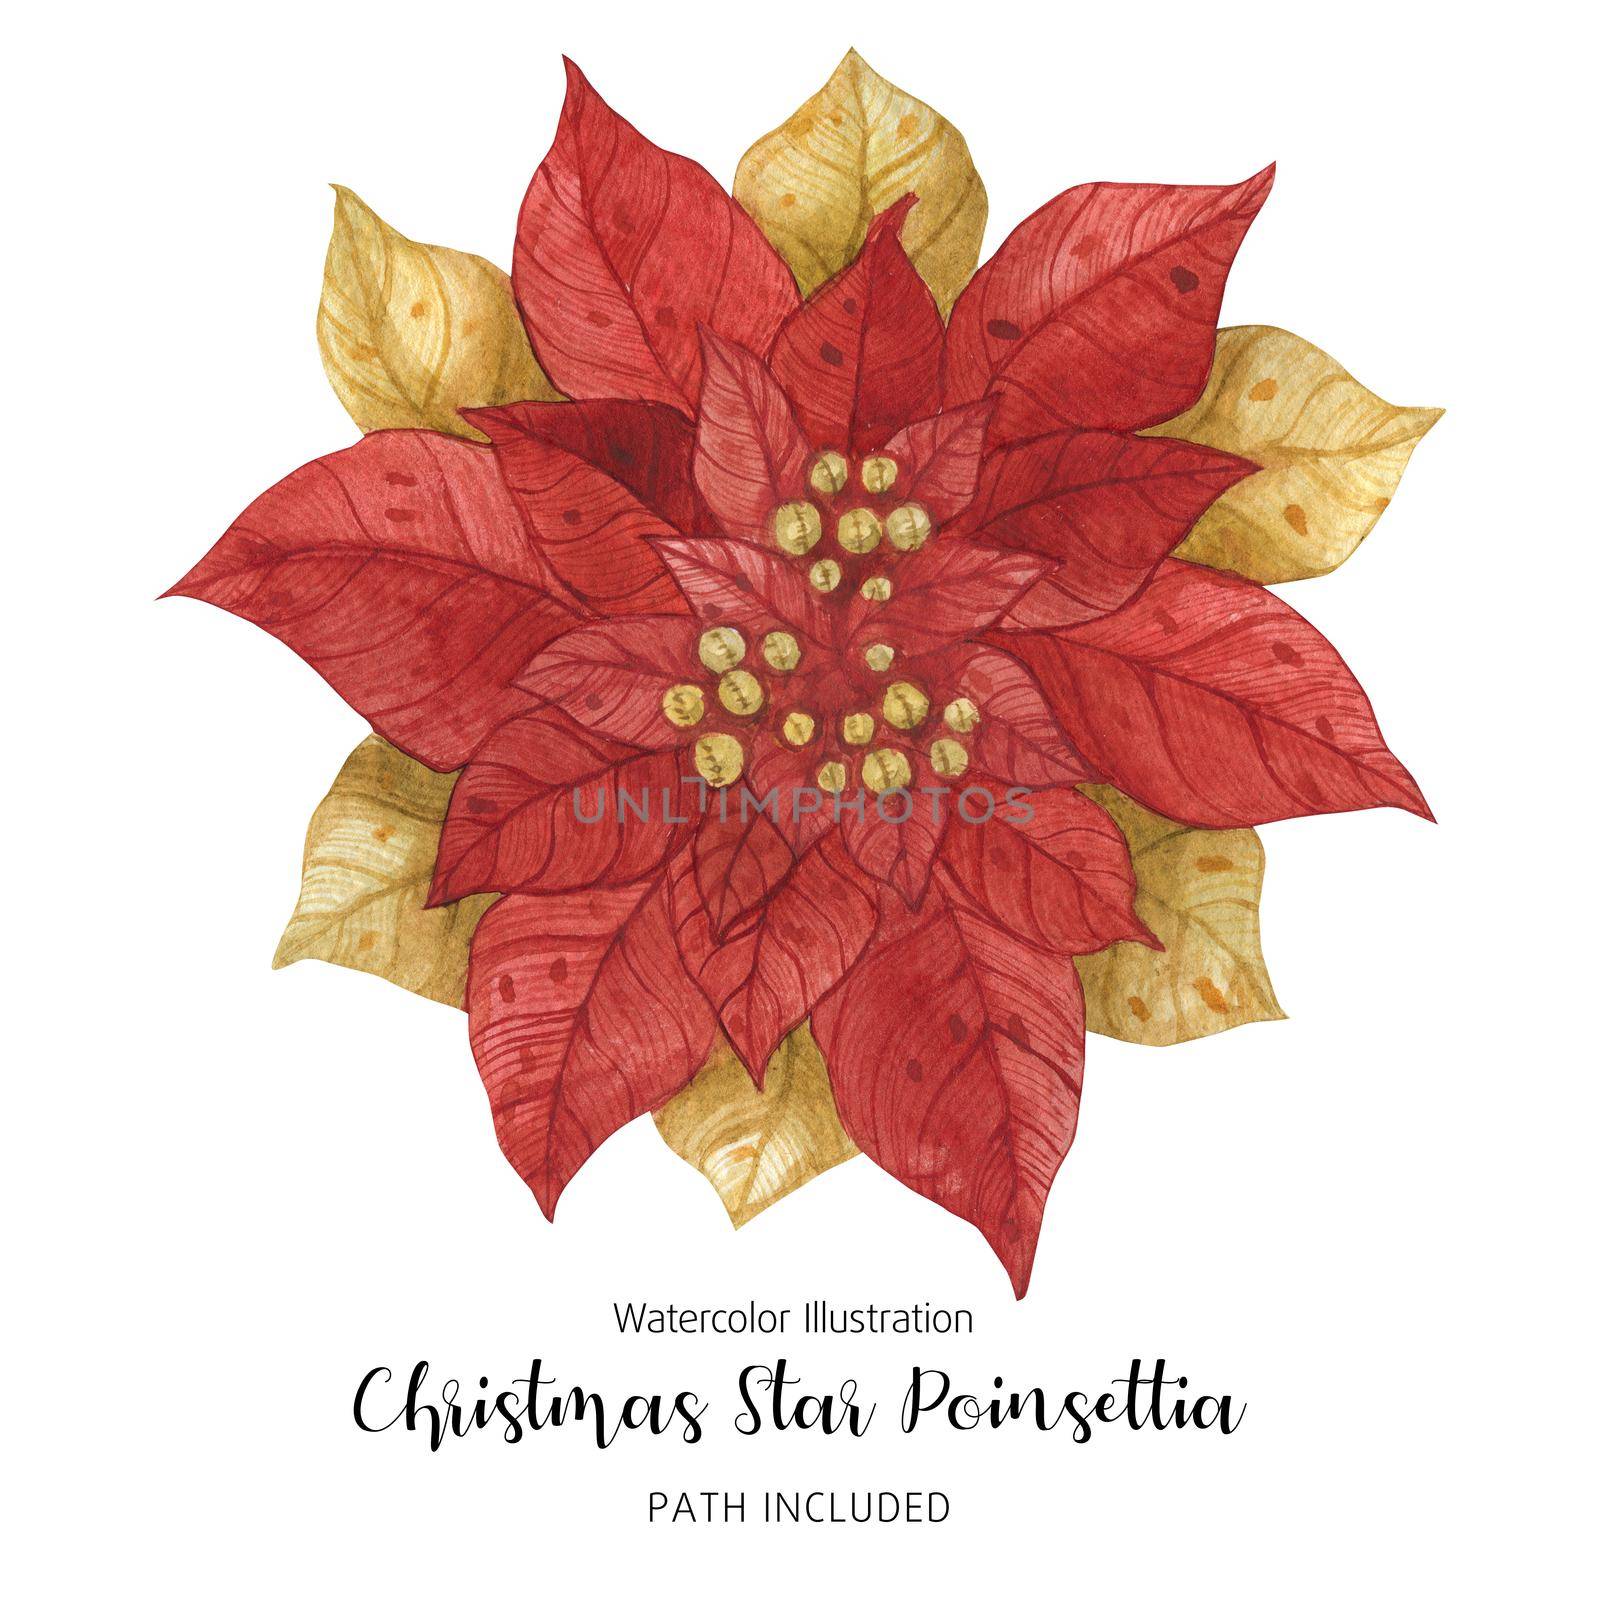 Poinsettia Red Gold Christmas Star Flower, watercolor hand-made illustration